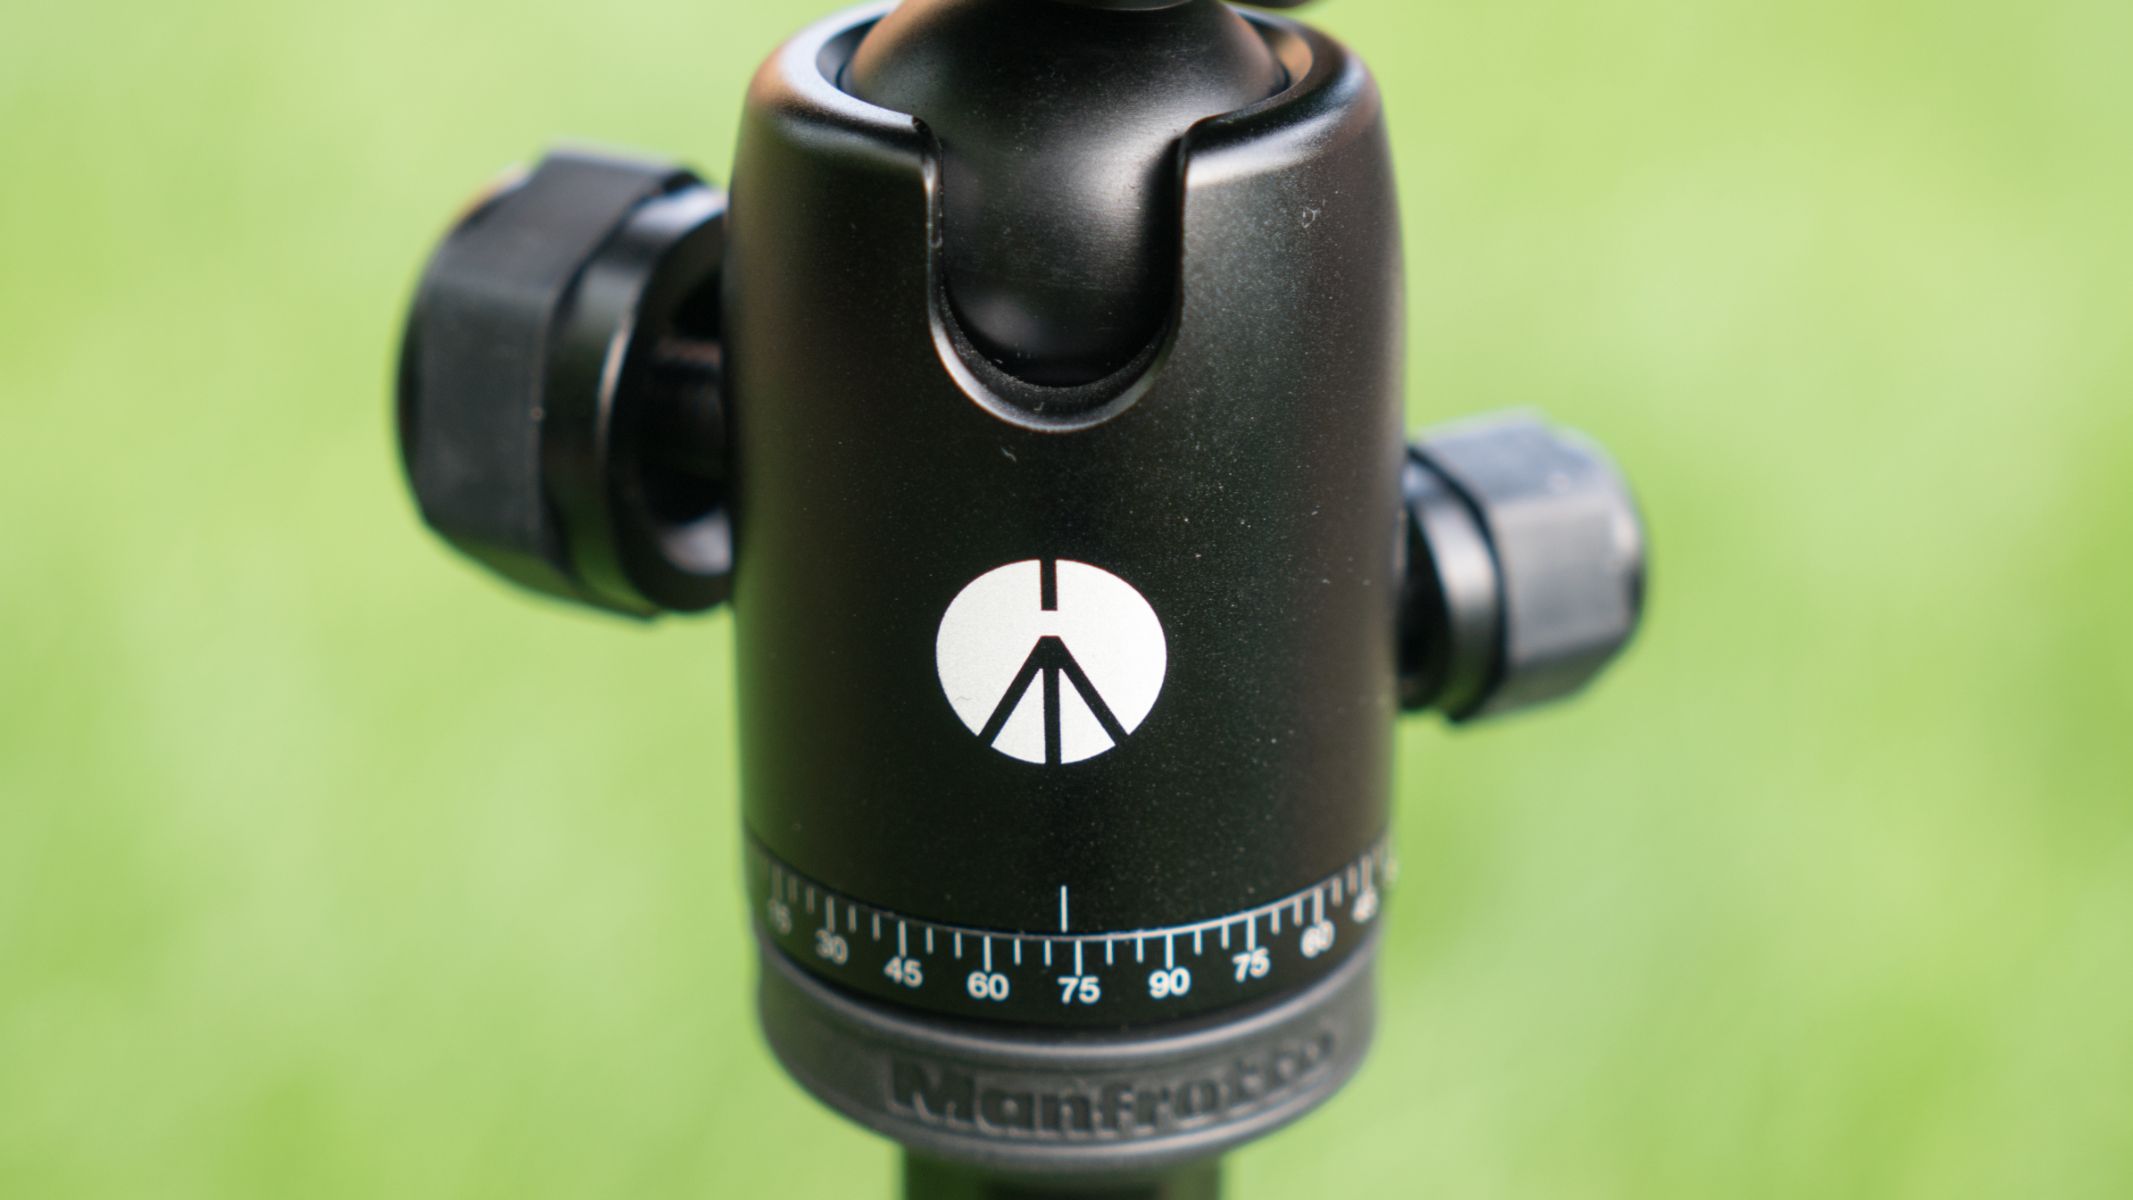 The tripod head with panoramic meters